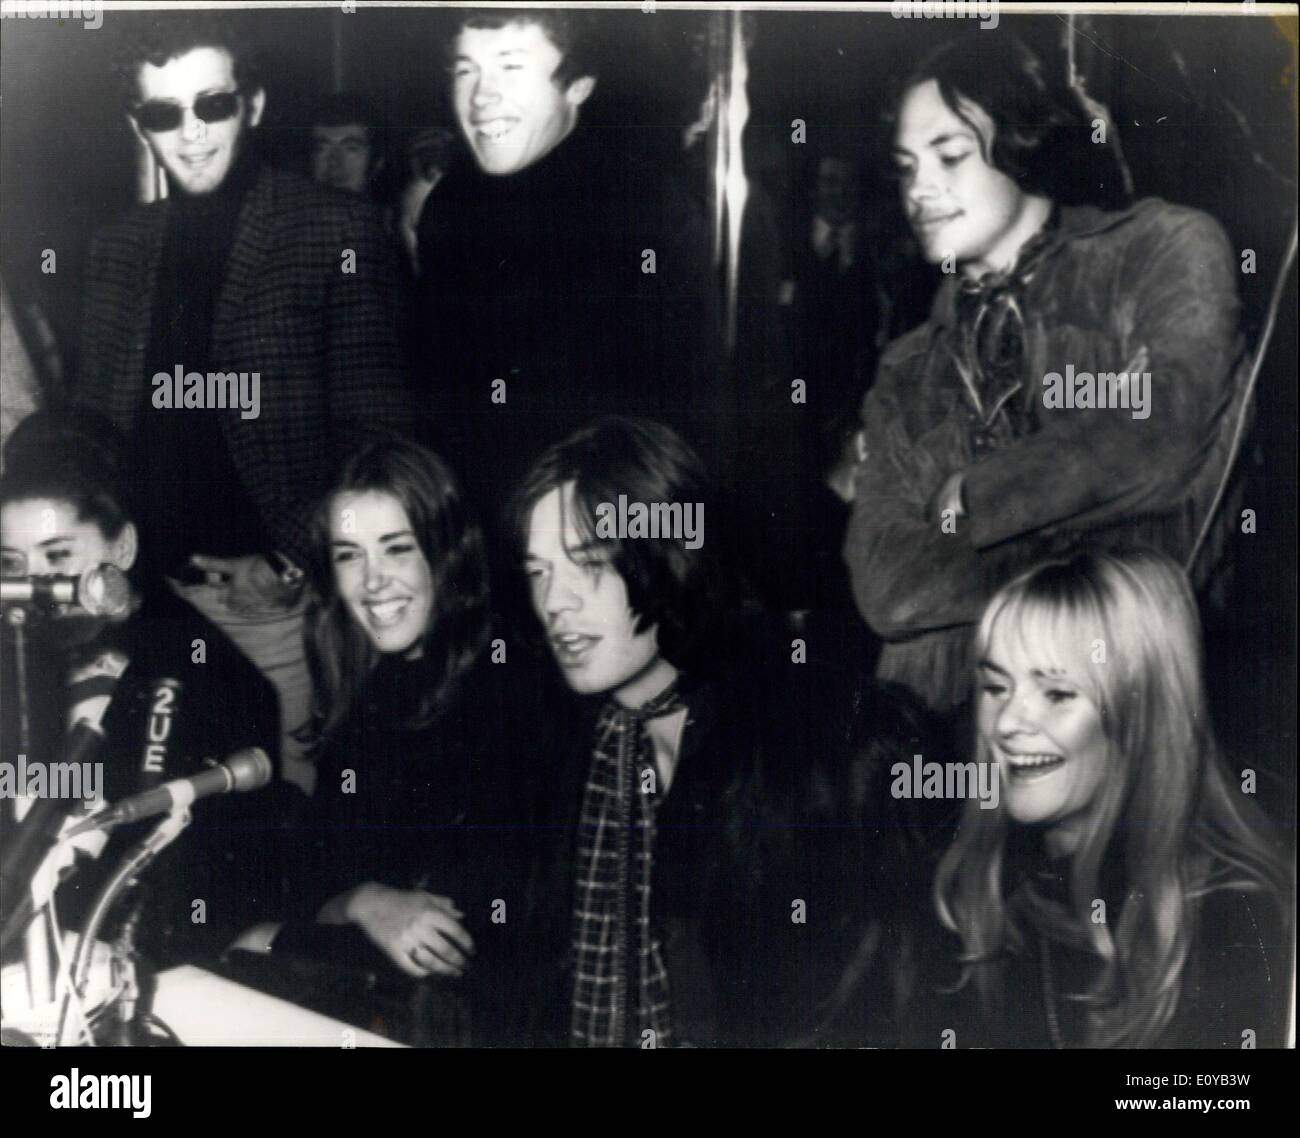 Jul. 09, 1969 - Mick Jager Holds Press Conference in Sydney After Marianne Faithful End Been Rushed to Hospital. Photo Shows:- Rolling Stone Mice Jagger Seen Giving Press Conference in Sydney after his girl friend Marine Faithfull and been rushed to hospital in a Jagger said: ''I Don't think so'' Others in the Picture are Unidentified seat of the Wed Kelly film is which Jagger is to Play the Role of the Australia folk here. Stock Photo